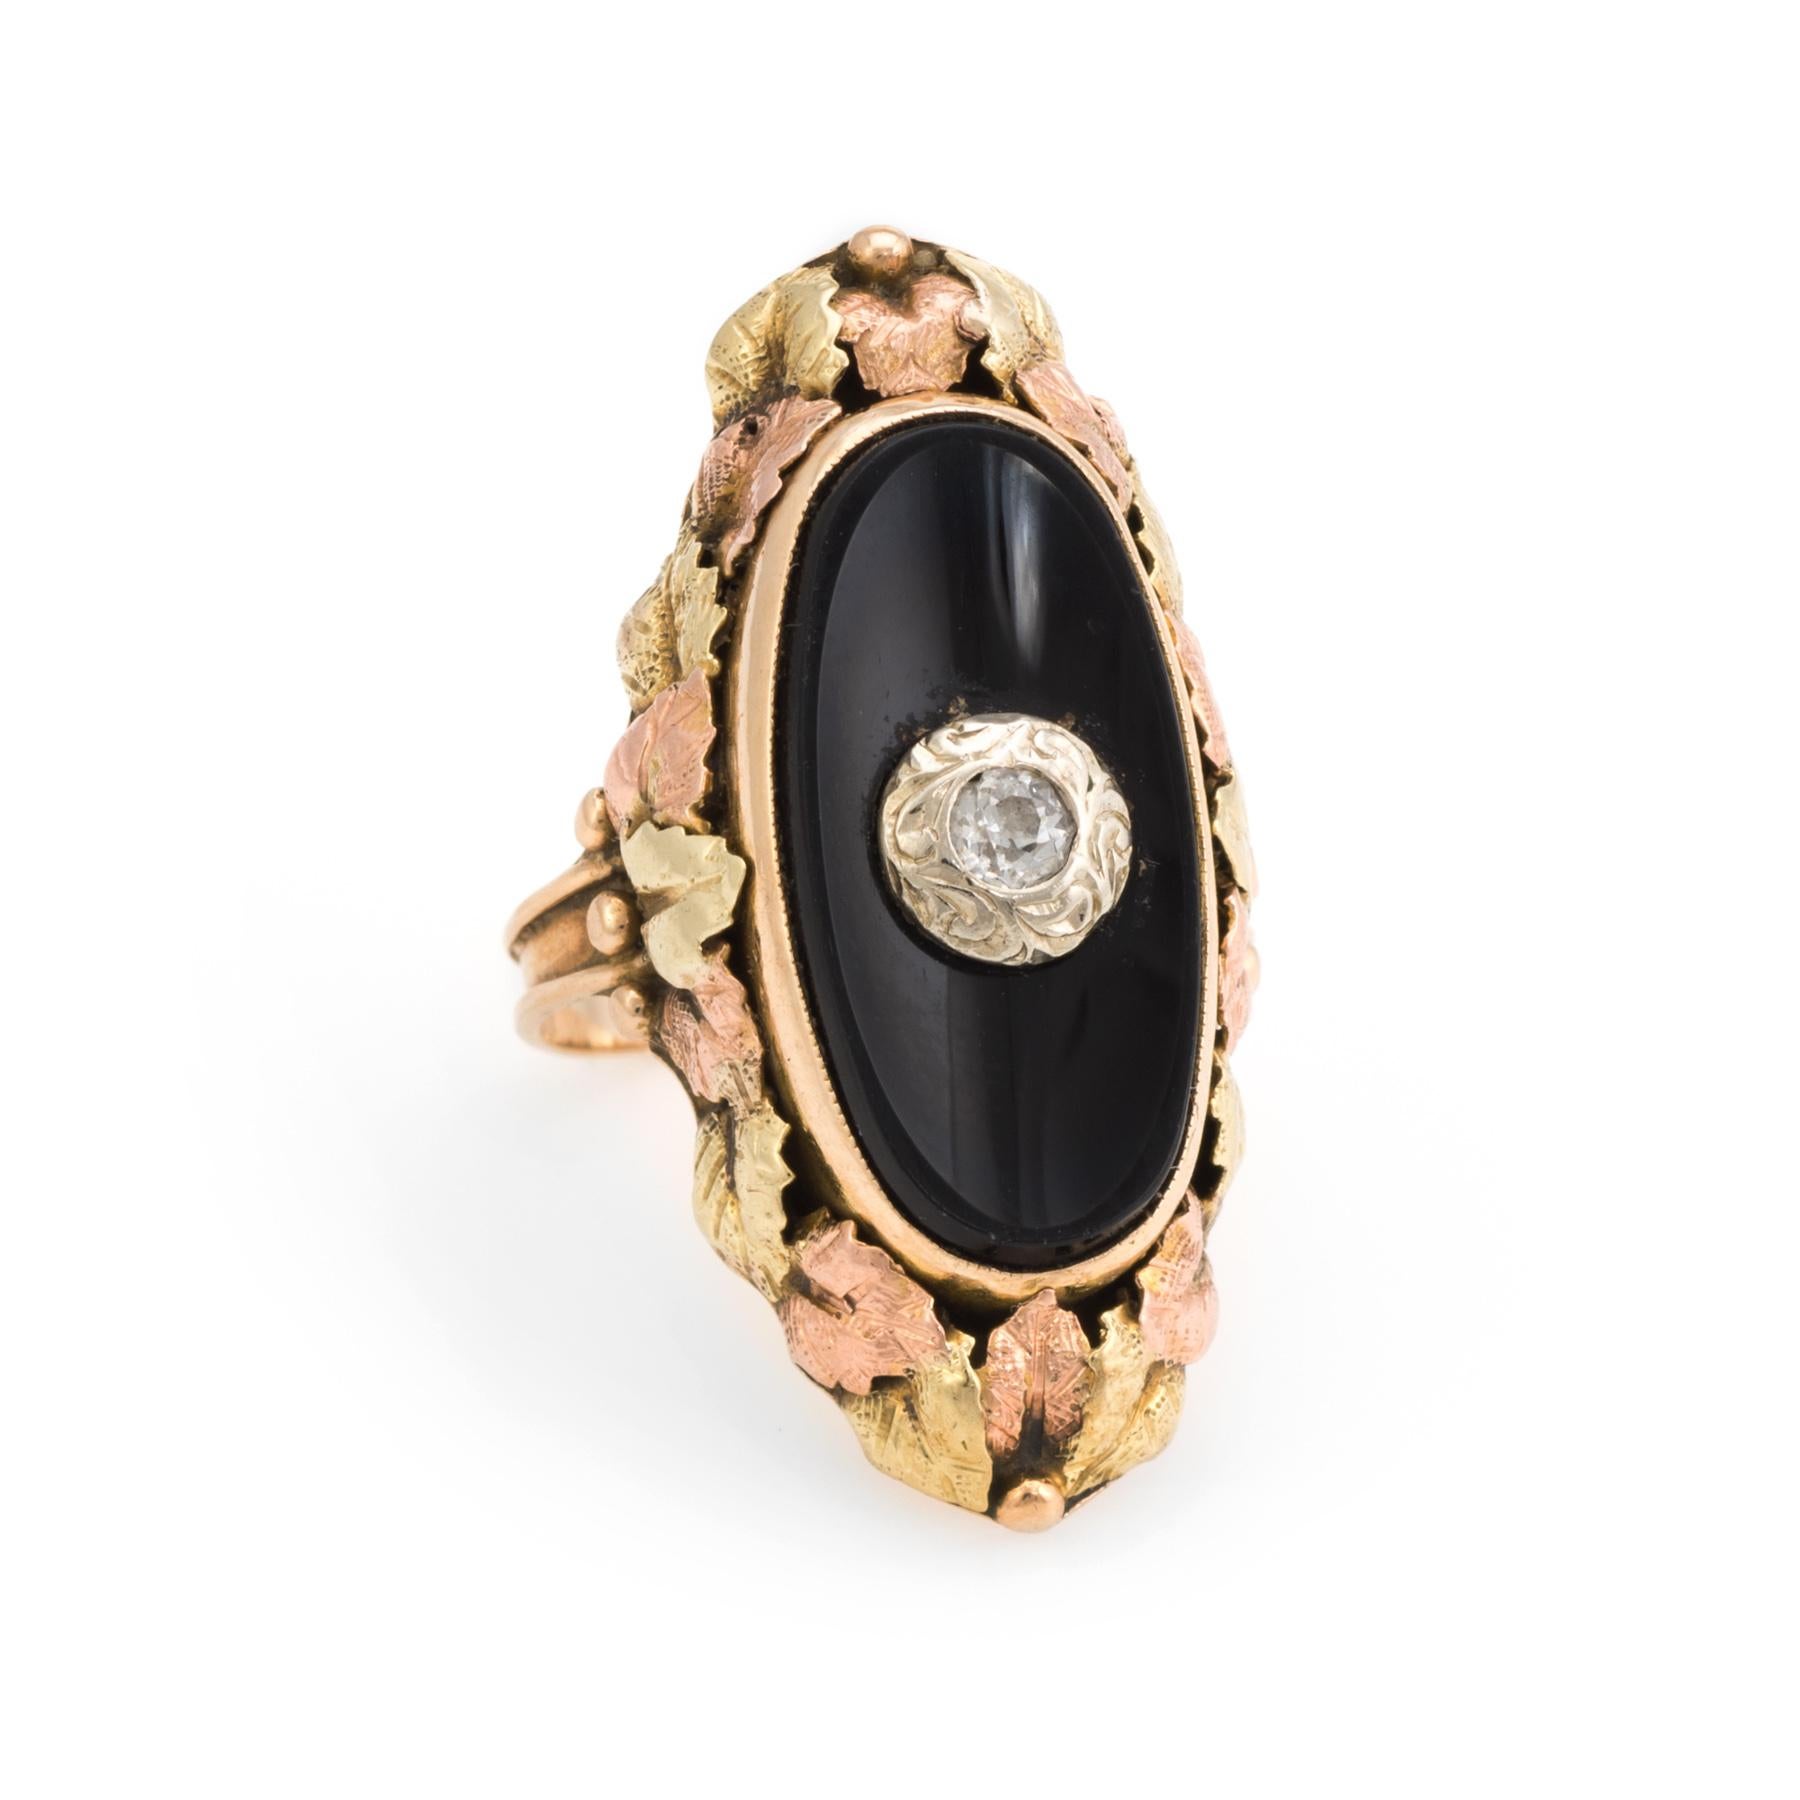 Finely detailed ring (circa 1920s to 1930s), crafted in 14 karat yellow gold. 

Centrally mounted estimated 0.06 carat old mine cut diamond (estimated at J-K color and I1 clarity). The onyx measures 19mm x 9.5mm.  

Distinct and elaborate rose and